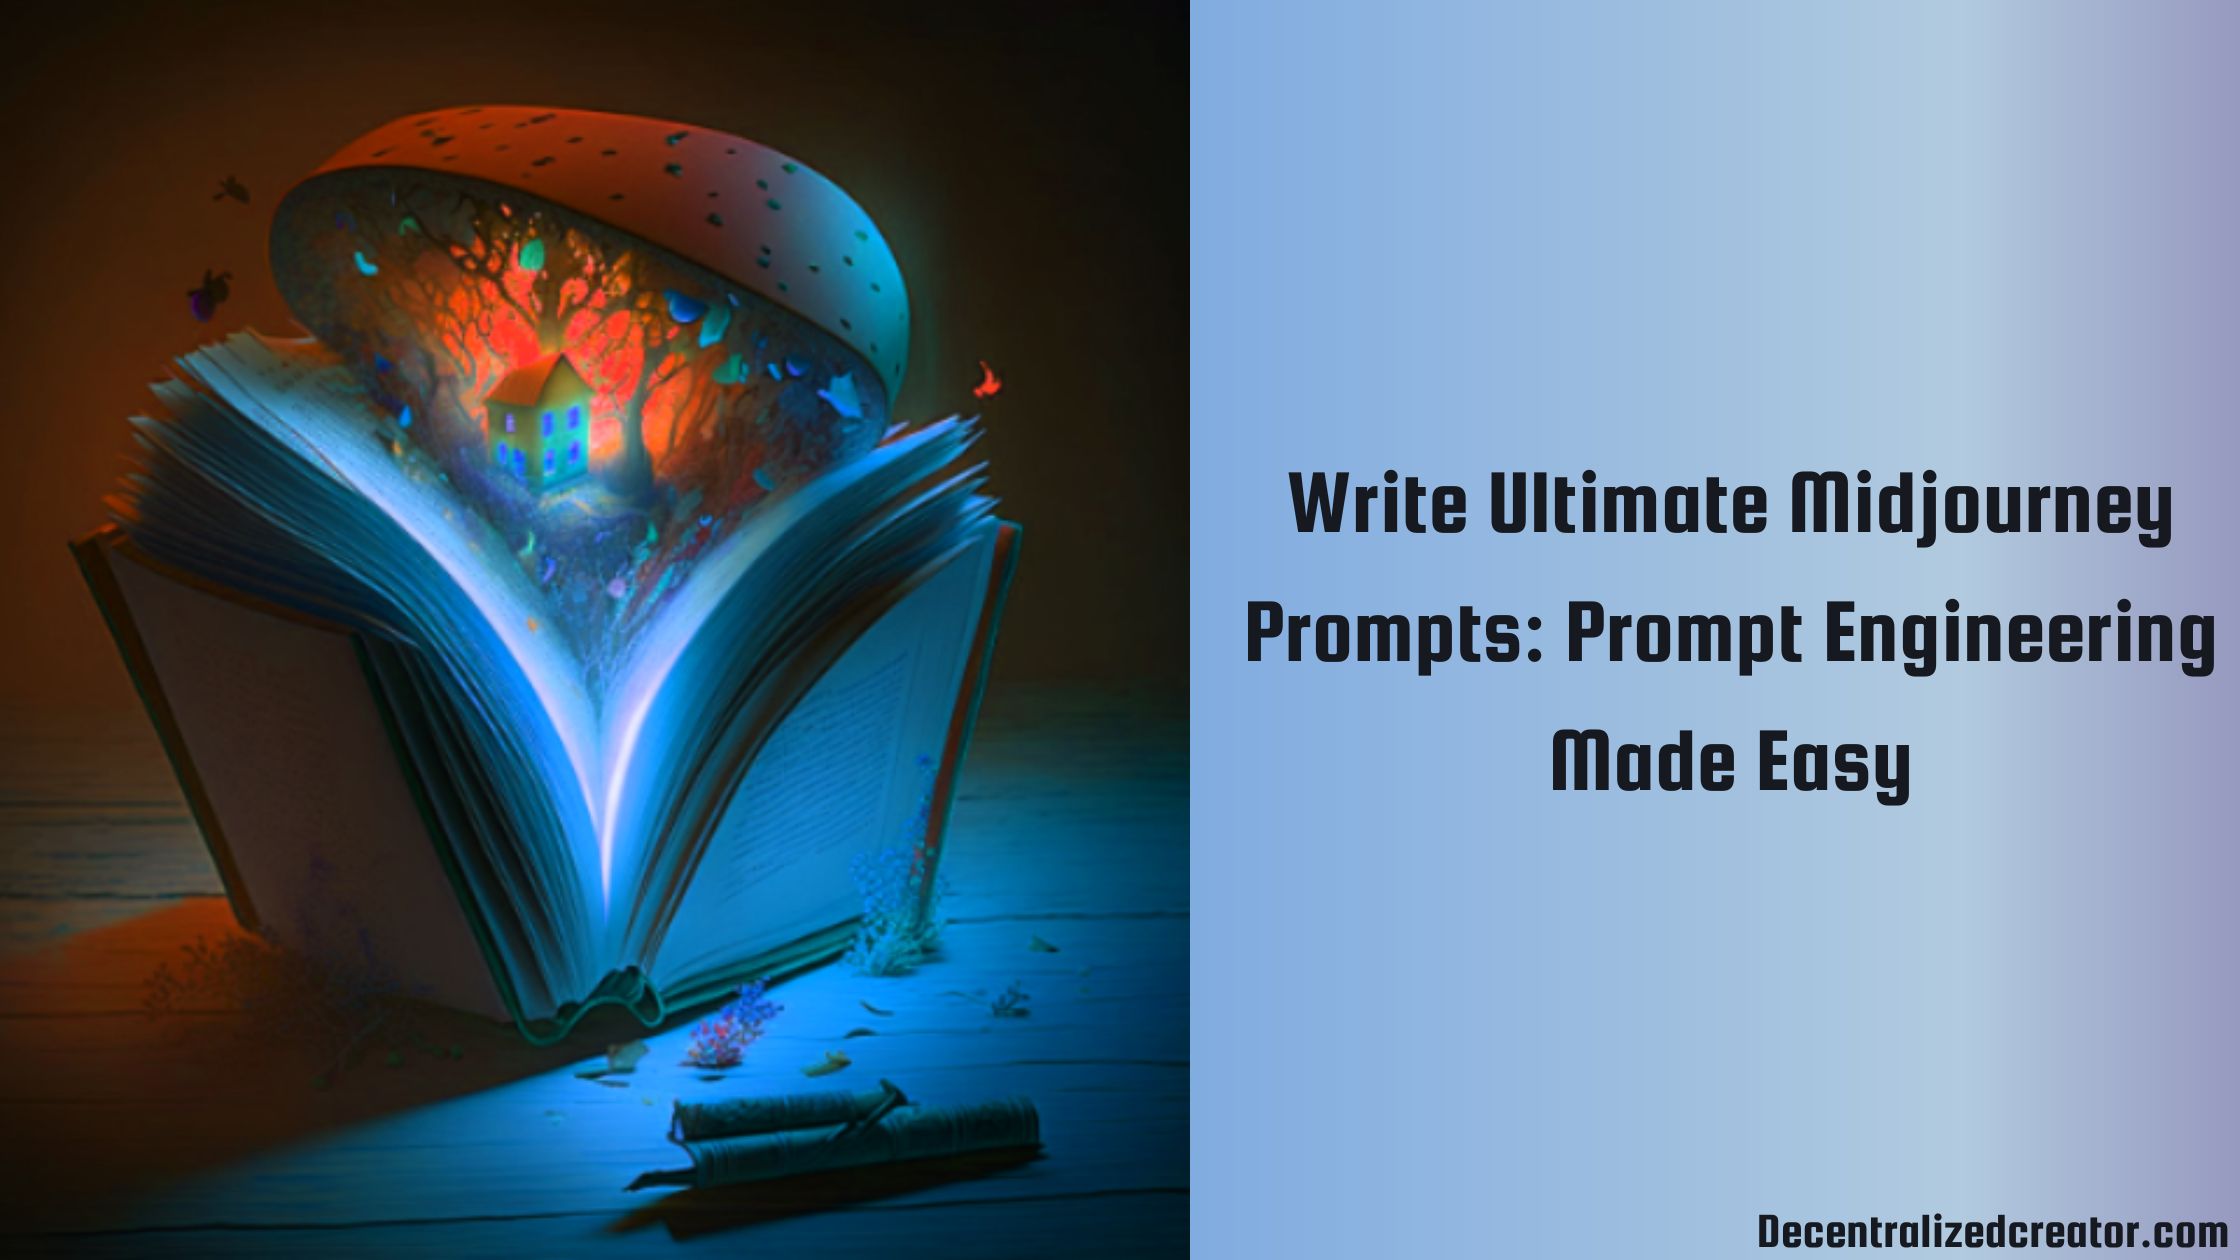 Write Ultimate Midjourney Prompts: Prompt Engineering Made Easy